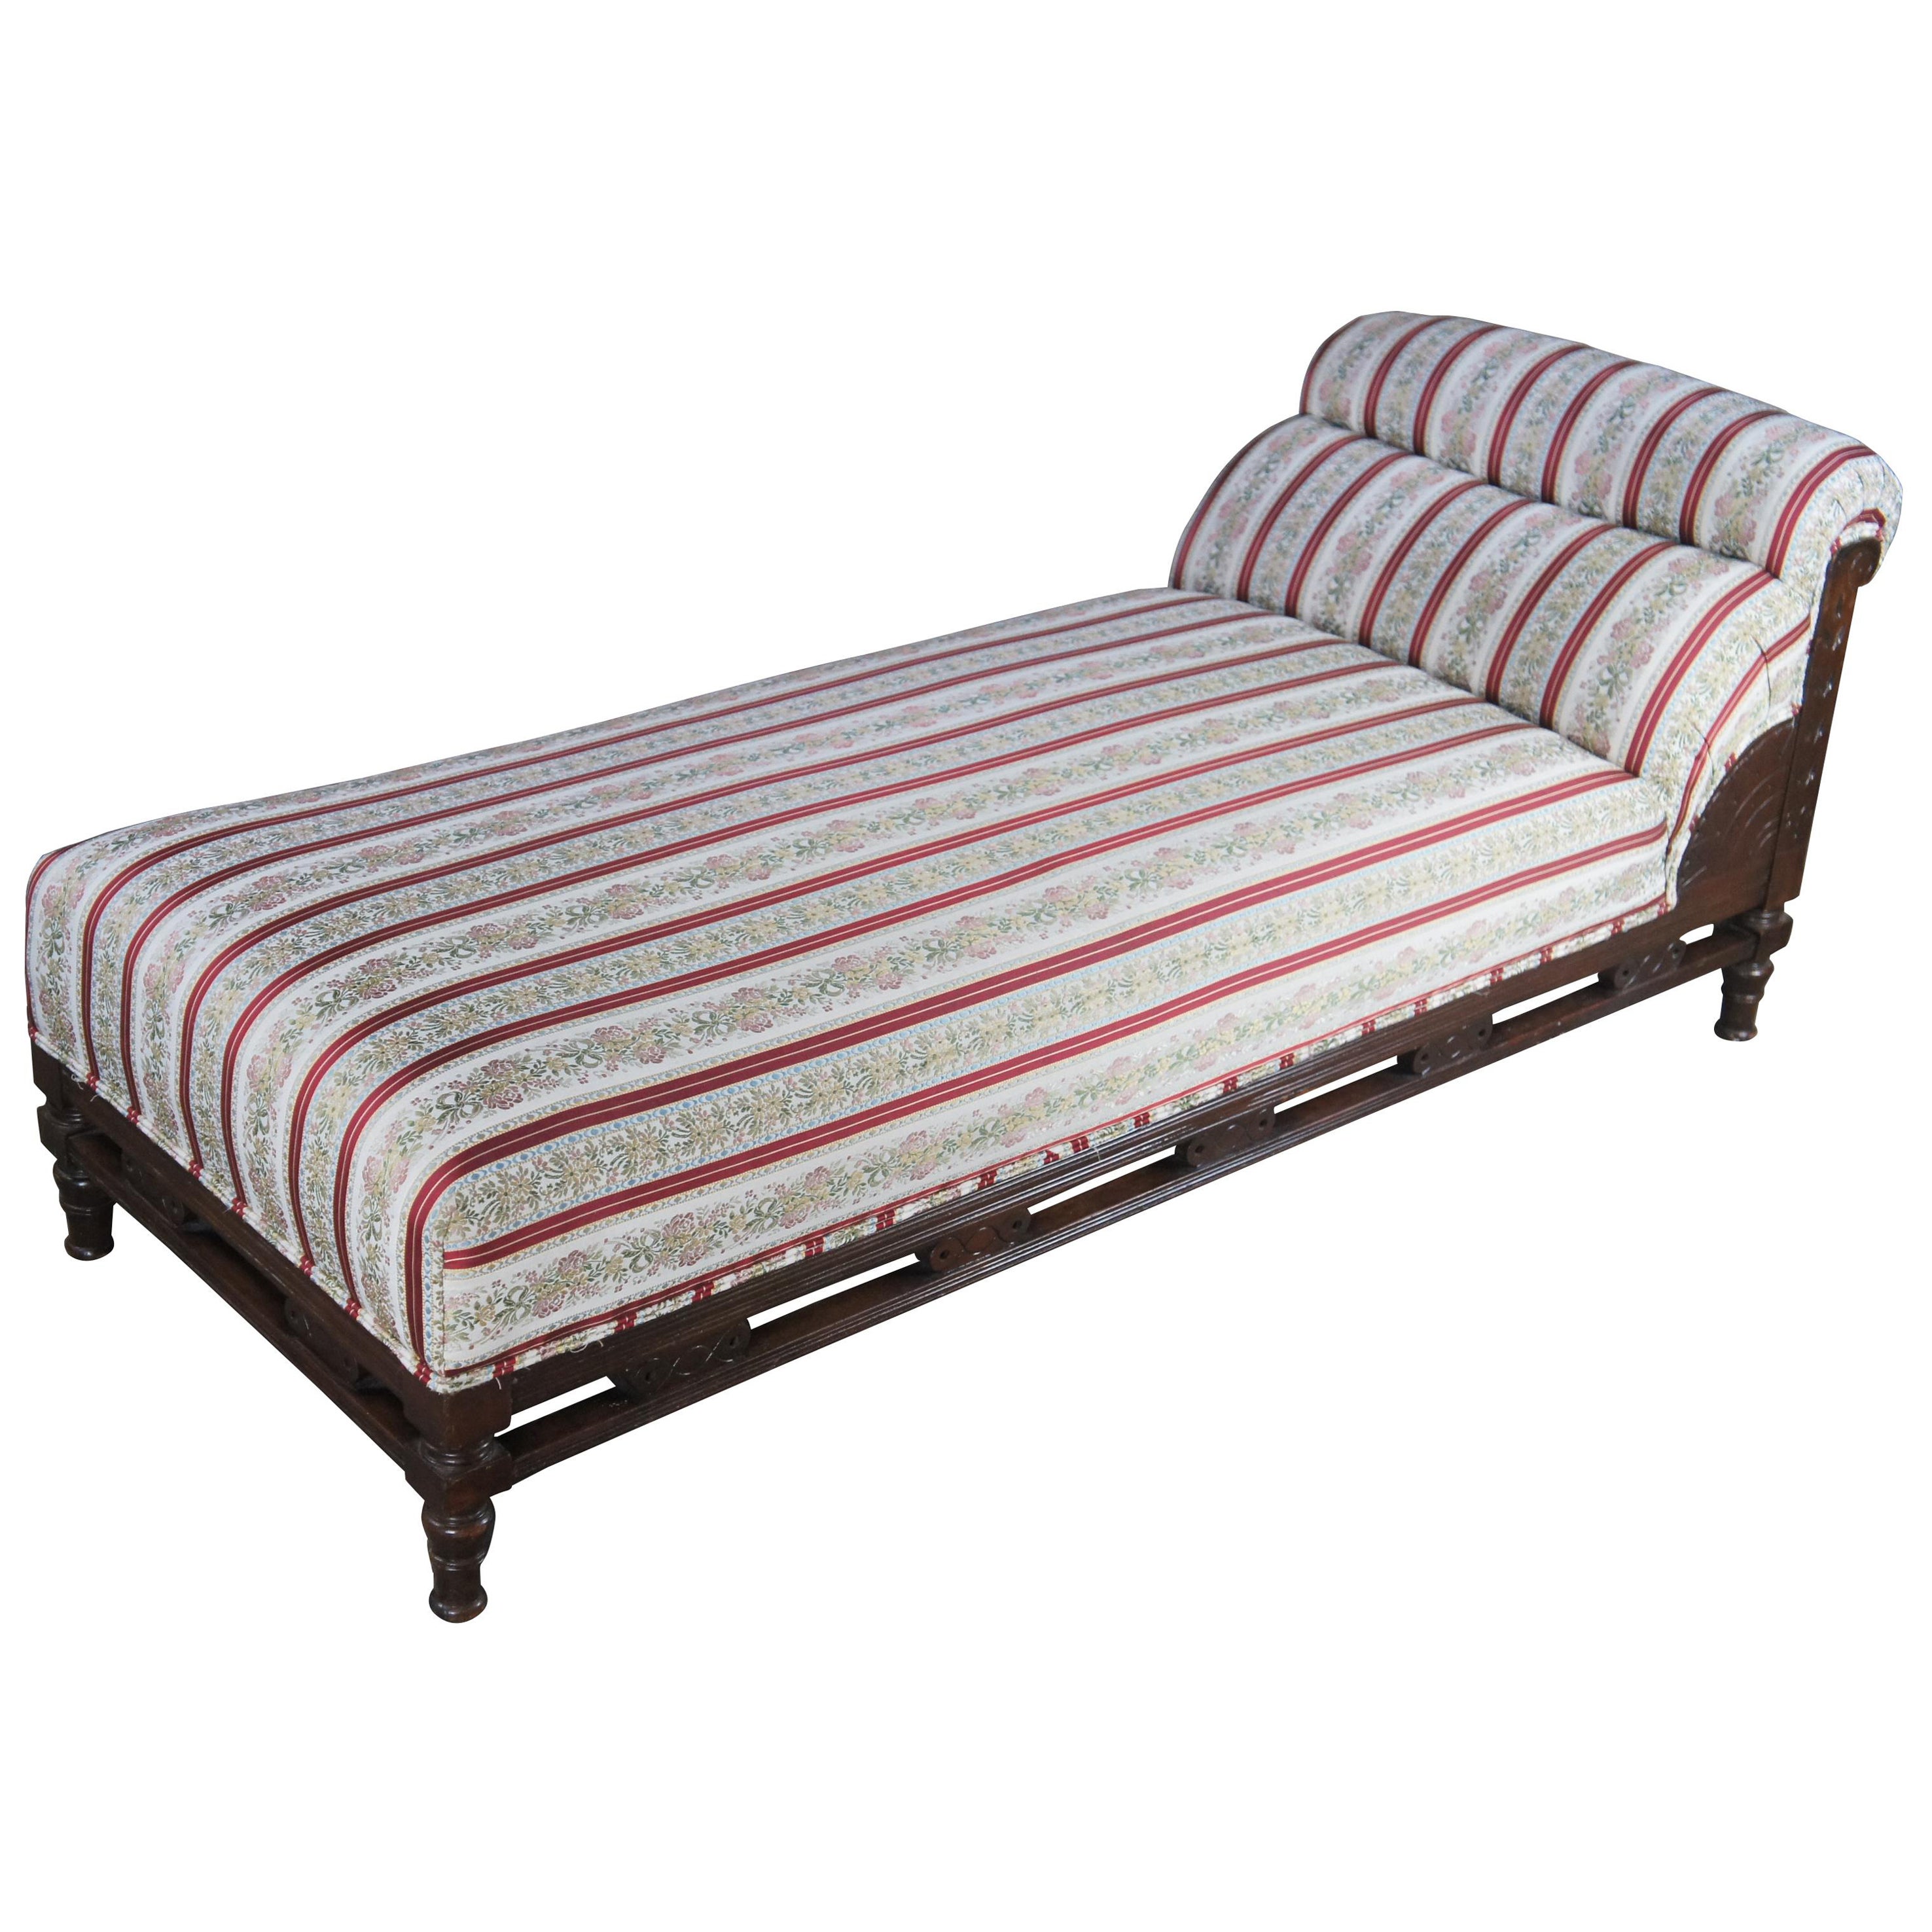 Antique Victorian Eastlake Mahogany Daybed Chaise Lounge Fainting Couch Recamier For Sale